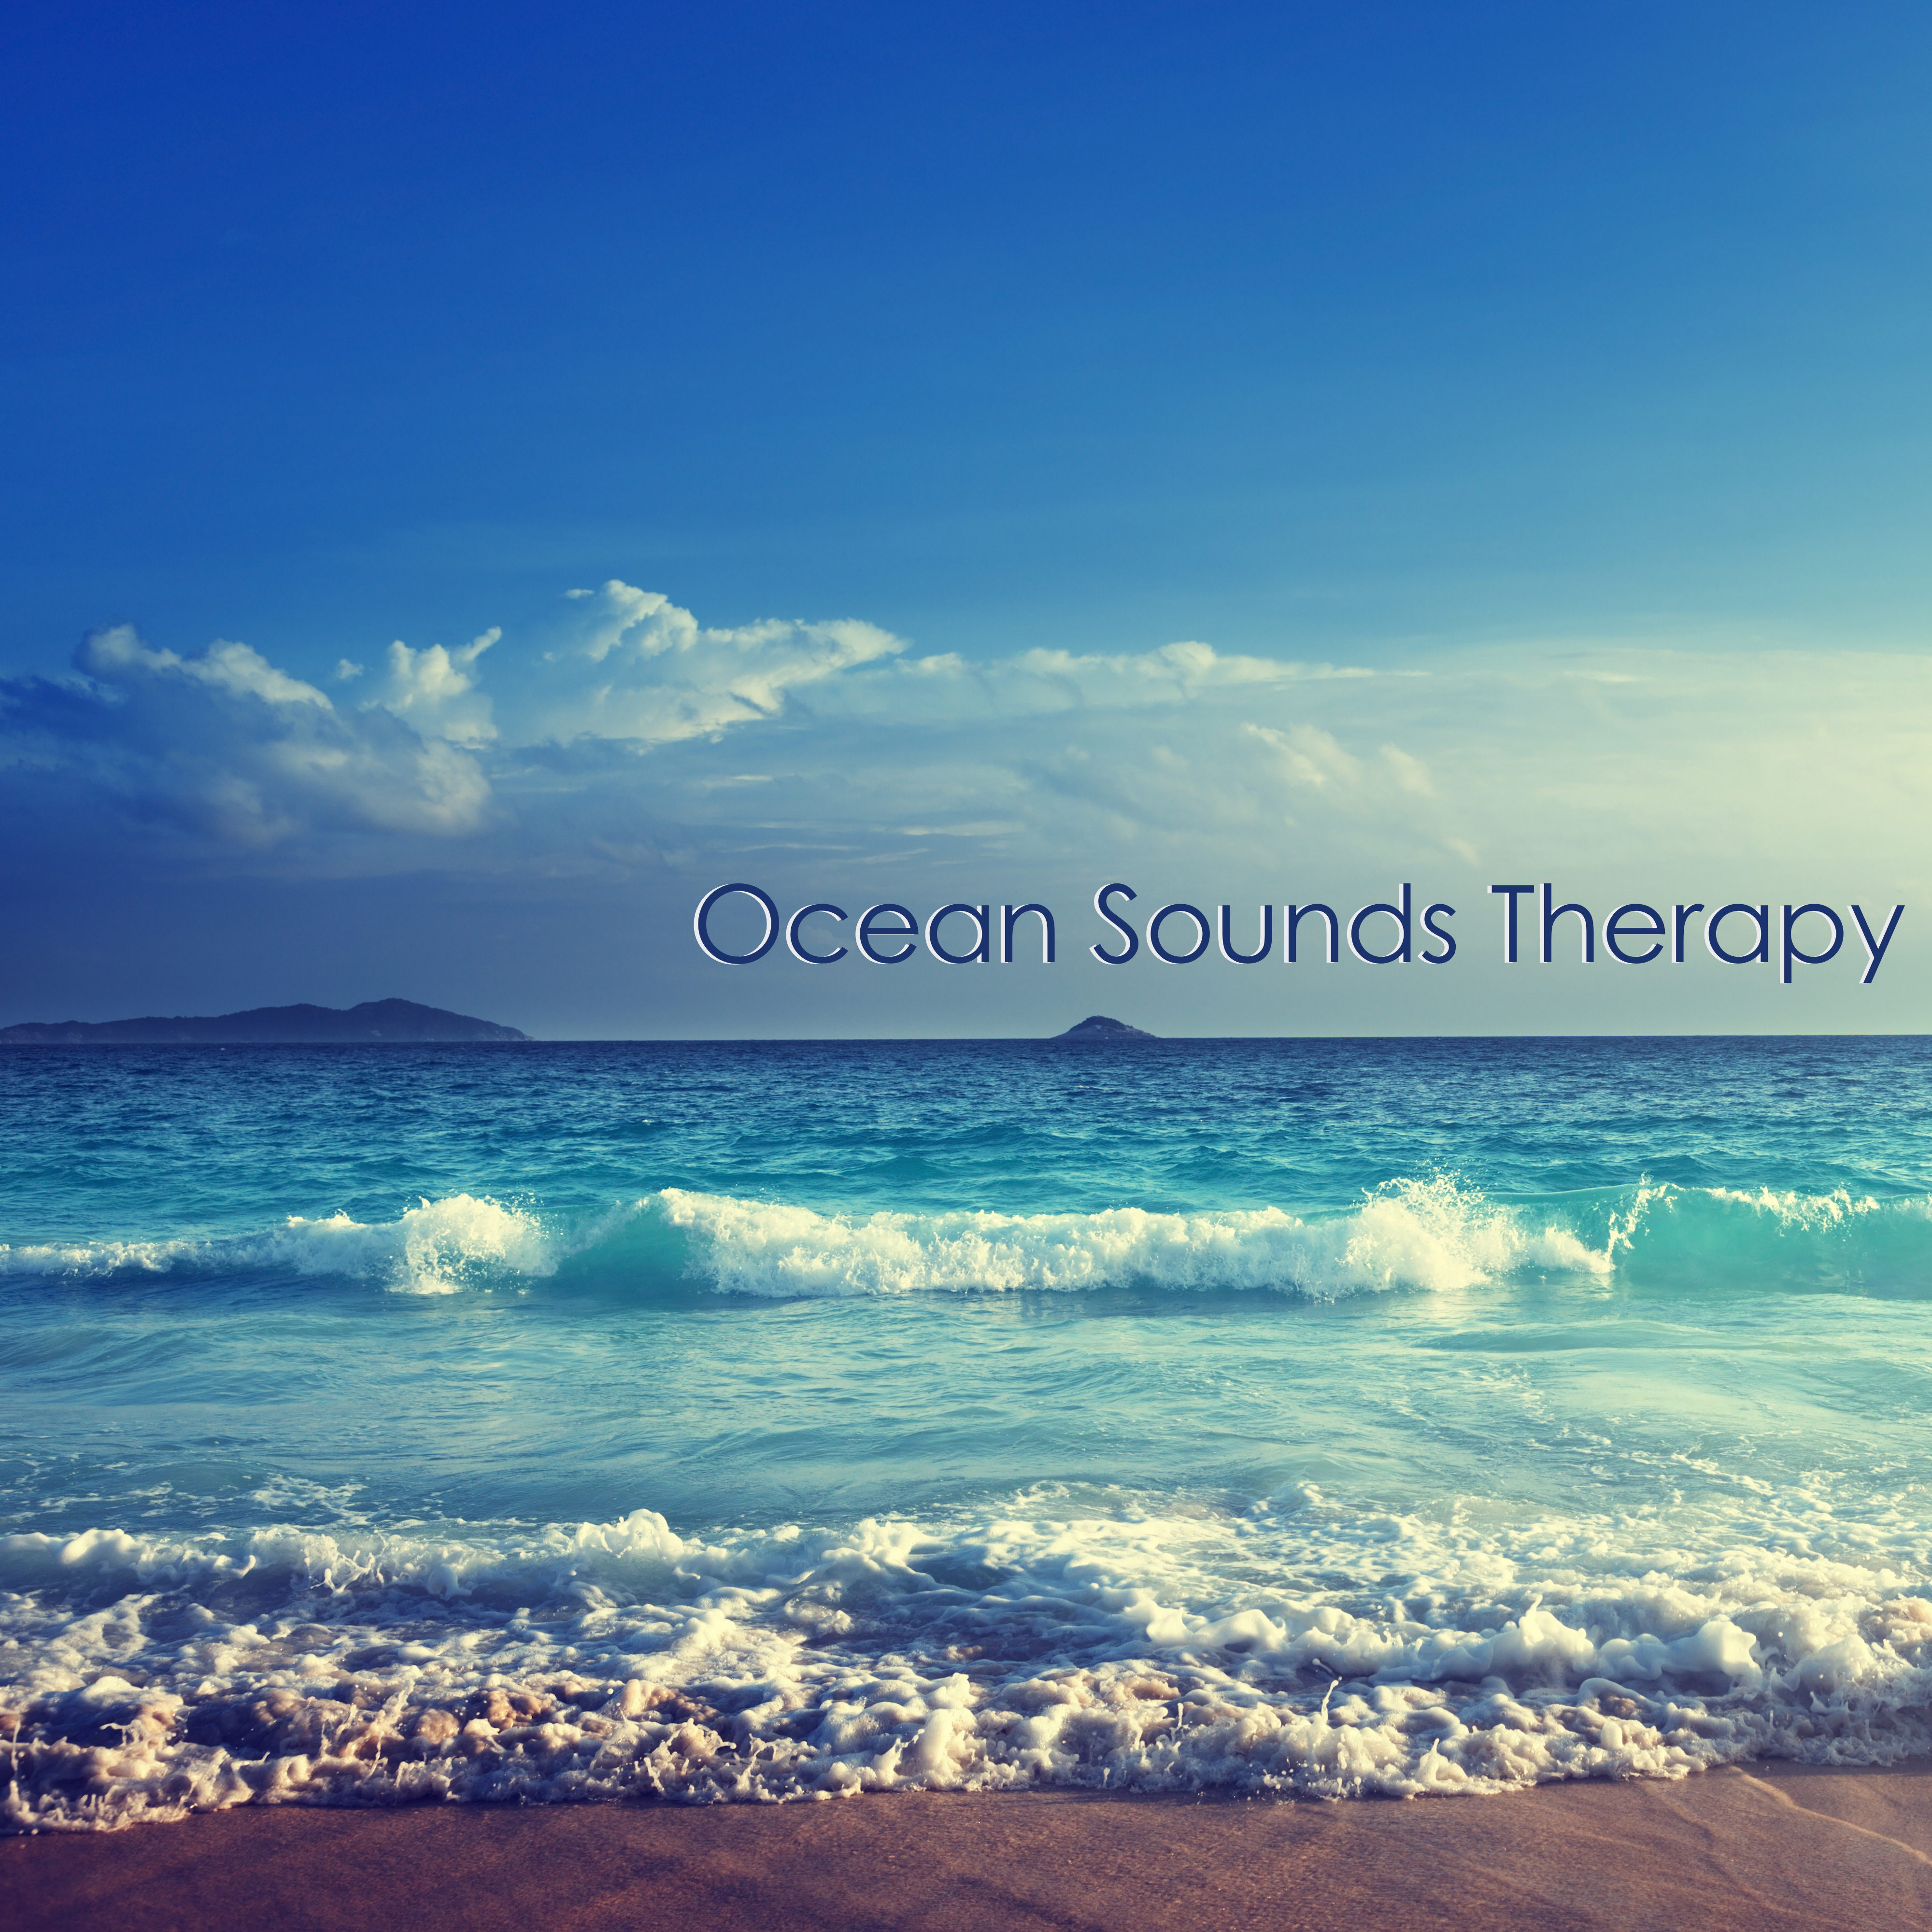 Ocean Sounds Therapy - Ocean Meditation Music & Natural Ambience Music with Water Sound Effects for Complete Relaxation